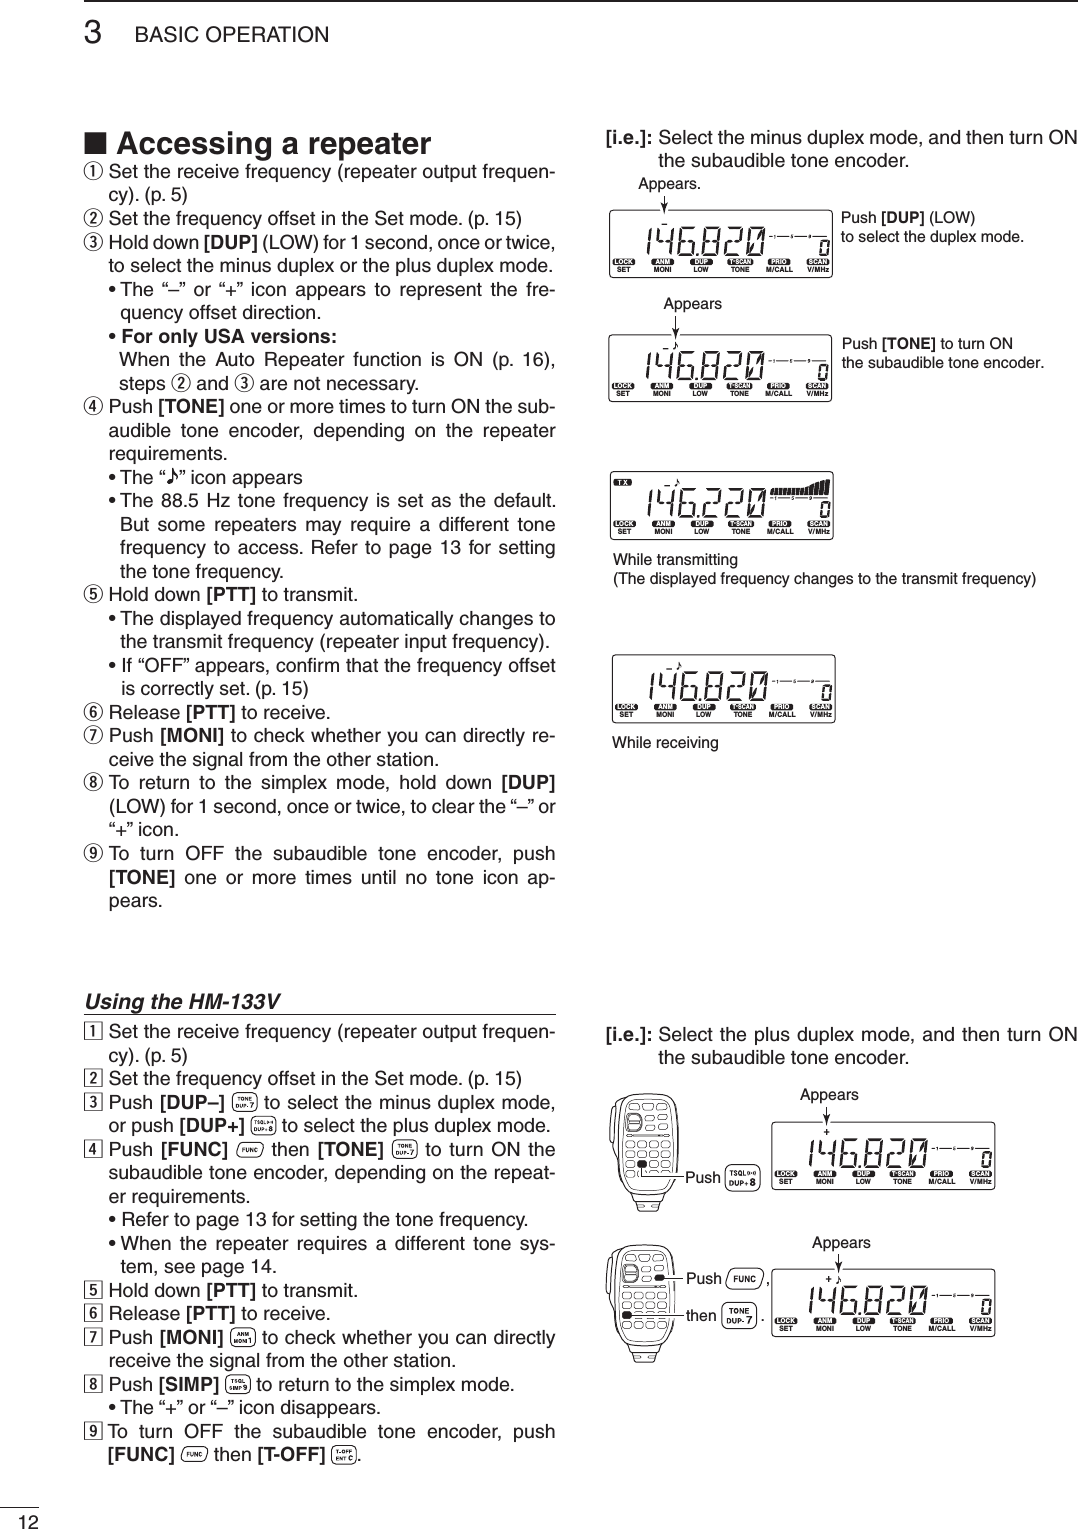 123BASIC OPERATION■ Accessing a repeaterq  Set the receive frequency (repeater output frequen-cy). (p. 5)w  Set the frequency offset in the Set mode. (p. 15)e  Hold down [DUP] (LOW) for 1 second, once or twice, to select the minus duplex or the plus duplex mode. •  The “–” or “+” icon appears to represent the fre-quency offset direction.  •  For only USA versions:       When the Auto Repeater function is ON (p. 16), steps w and e are not necessary. r  Push [TONE] one or more times to turn ON the sub-audible tone encoder, depending on the repeater requirements. • The “ ” icon appears  •  The 88.5 Hz tone frequency is set as the default. But some repeaters may require a different tone frequency to access. Refer to page 13 for setting the tone frequency.t Hold down [PTT] to transmit. •  The displayed frequency automatically changes to the transmit frequency (repeater input frequency). •  If “OFF” appears, conﬁ rm that the frequency offset is correctly set. (p. 15)y Release [PTT] to receive.u  Push [MONI] to check whether you can directly re-ceive the signal from the other station.i  To return to the simplex mode, hold down [DUP] (LOW) for 1 second, once or twice, to clear the “–” or “+” icon.o  To turn OFF the subaudible tone encoder, push [TONE] one or more times until no tone icon ap-pears.Using the HM-133Vz  Set the receive frequency (repeater output frequen-cy). (p. 5)x  Set the frequency offset in the Set mode. (p. 15)c  Push [DUP–]   to select the minus duplex mode, or push [DUP+]   to select the plus duplex mode.v  Push [FUNC]   then [TONE]   to turn ON the subaudible tone encoder, depending on the repeat-er requirements.  • Refer to page 13 for setting the tone frequency. •  When the repeater requires a different tone sys-tem, see page 14.b Hold down [PTT] to transmit.n Release [PTT] to receive.m  Push [MONI]   to check whether you can directly receive the signal from the other station.,  Push [SIMP]   to return to the simplex mode.  • The “+” or “–” icon disappears..  To turn OFF the subaudible tone encoder, push [FUNC]   then [T-OFF] .LOCKSETANMMONIDUPLOWT-SCANTONEPRIOM/CALLSCANV/MHzDIGITAL PRIO AO BUSYMUTENARMIDLOWAppears.Push [DUP] (LOW) to select the duplex mode.LOCKSETANMMONIDUPLOWT-SCANTONEPRIOM/CALLSCANV/MHzDIGITAL PRIO AO BUSYMUTENARMIDLOWAppearsPush [TONE] to turn ON the subaudible tone encoder.LOCKSETANMMONIDUPLOWT-SCANTONEPRIOM/CALLSCANV/MHzDIGITAL PRIOAO BUSYMUTENARMIDLOWLOCKSETANMMONIDUPLOWT-SCANTONEPRIOM/CALLSCANV/MHzDIGITAL PRIO AO BUSYMUTENARMIDLOWWhile transmitting(The displayed frequency changes to the transmit frequency)While receivingLOCKSETANMMONIDUPLOWT-SCANTONEPRIOM/CALLSCANV/MHzDIGITAL PRIO AO BUSYMUTENARMIDLOWLOCKSETANMMONIDUPLOWT-SCANTONEPRIOM/CALLSCANV/MHzDIGITAL PRIO AO BUSYMUTENARMIDLOWPushAppearsPush          ,then          .Appears[i.e.]:  Select the minus duplex mode, and then turn ON the subaudible tone encoder.[i.e.]:  Select the plus duplex mode, and then turn ON the subaudible tone encoder.